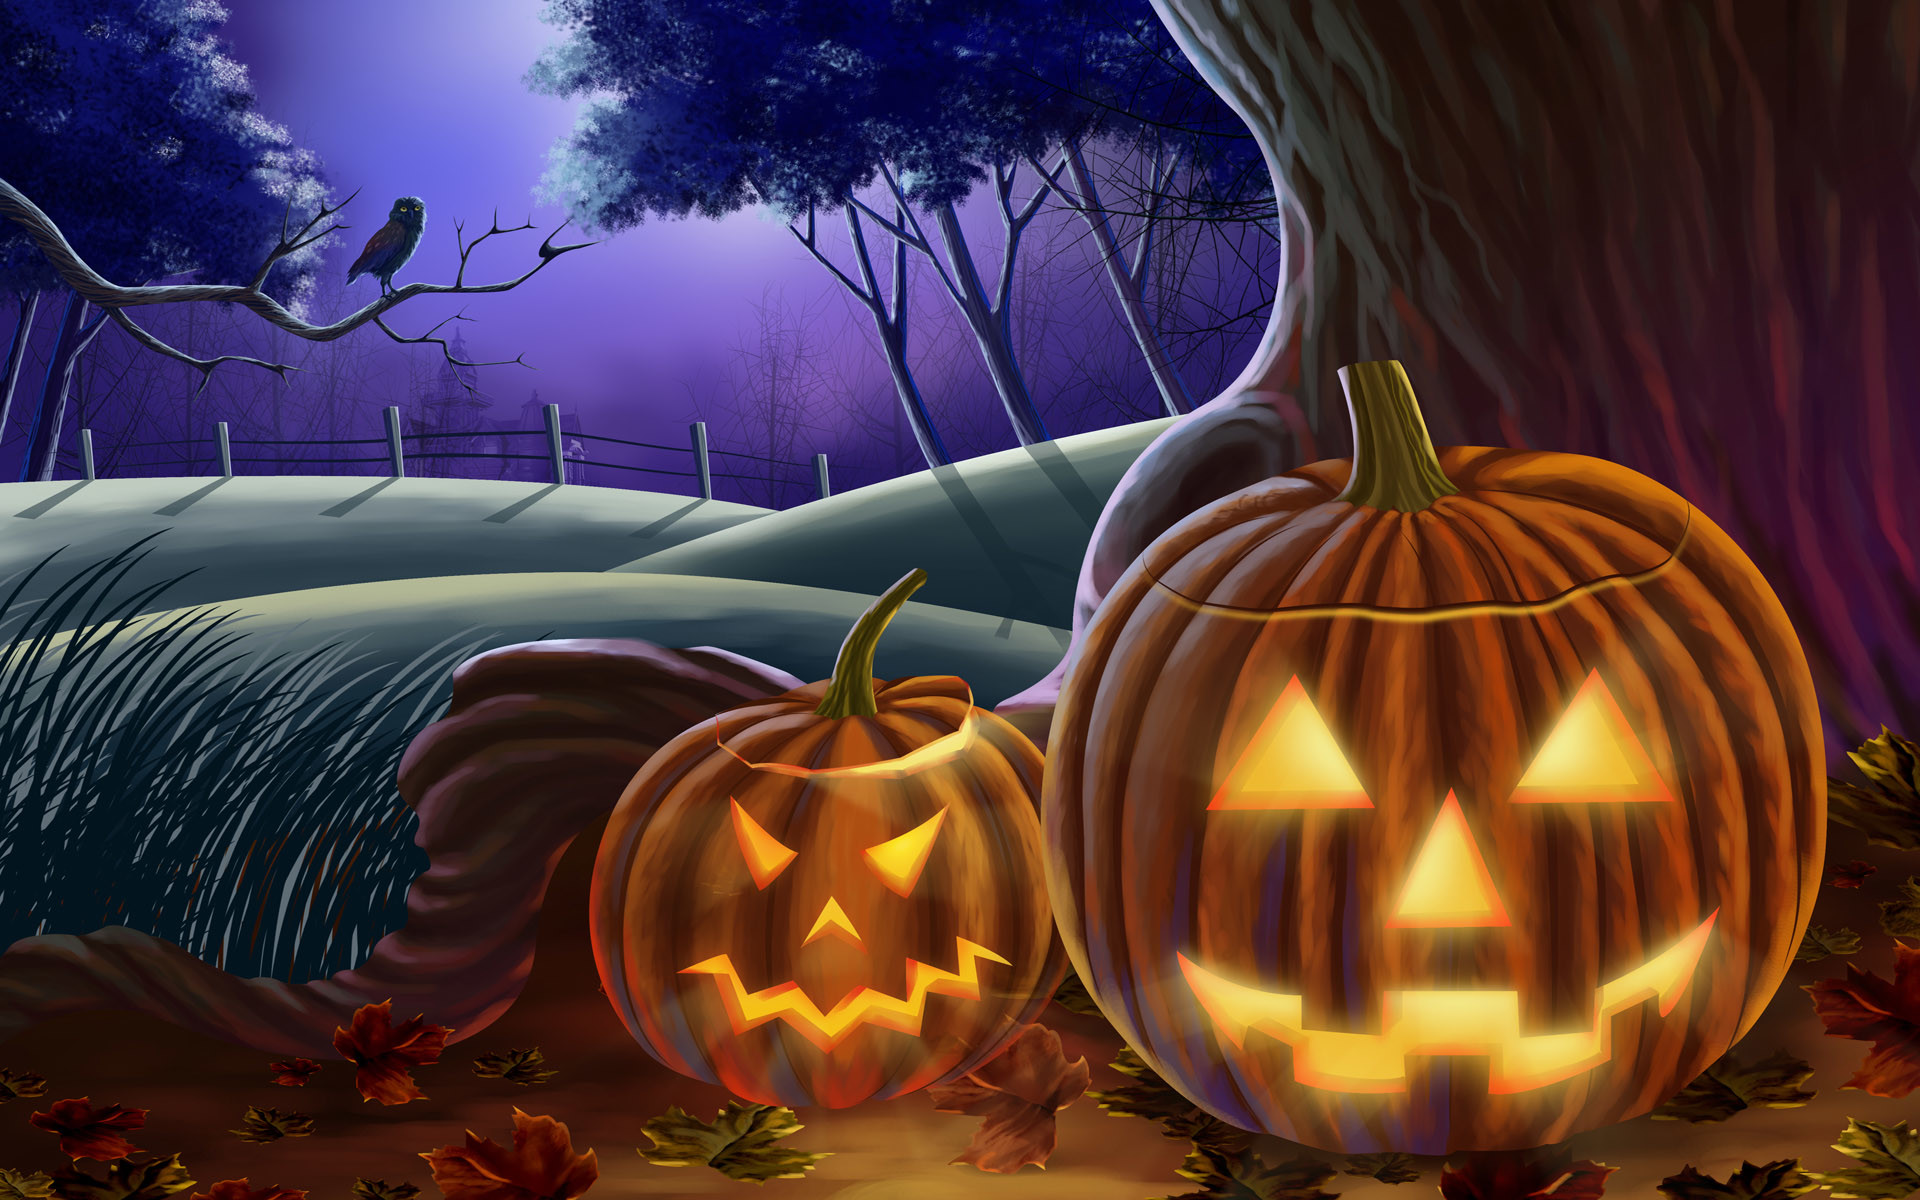 Sinister Halloween Free Download PC Game